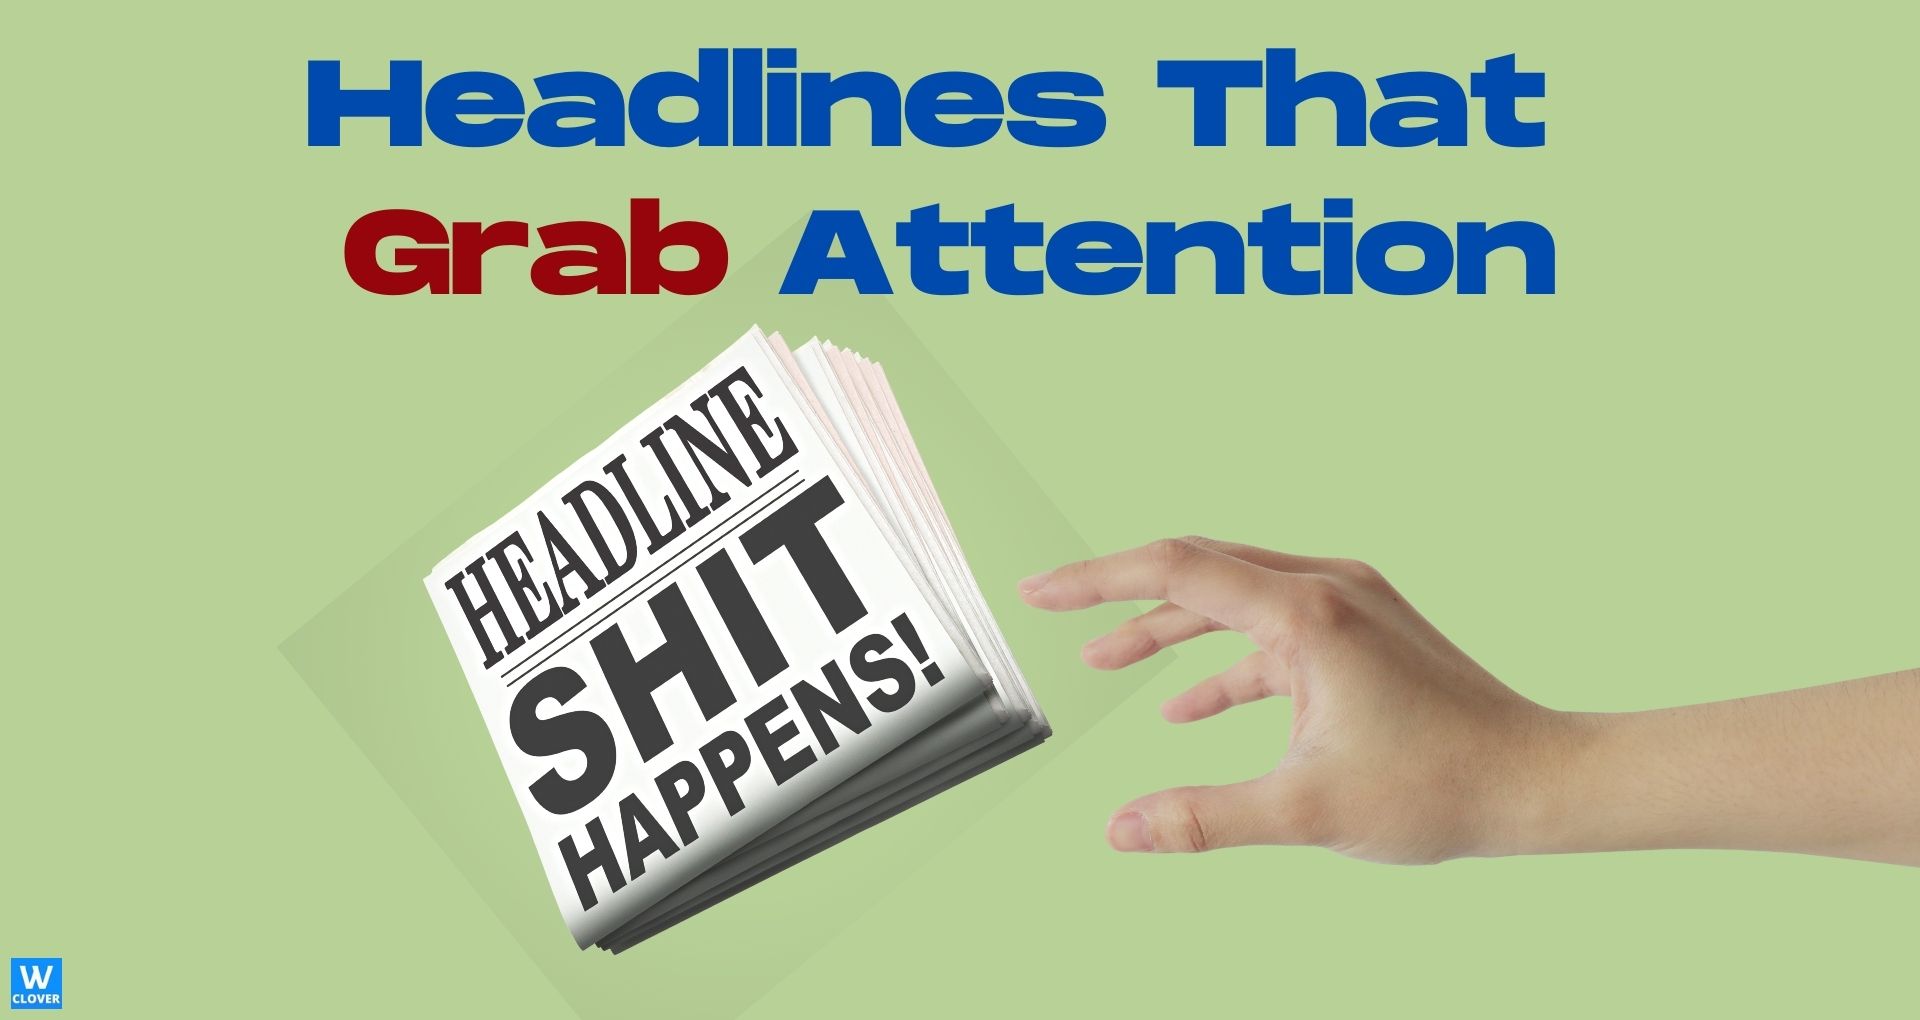 copywriting exercises-Create headlines that grab attention